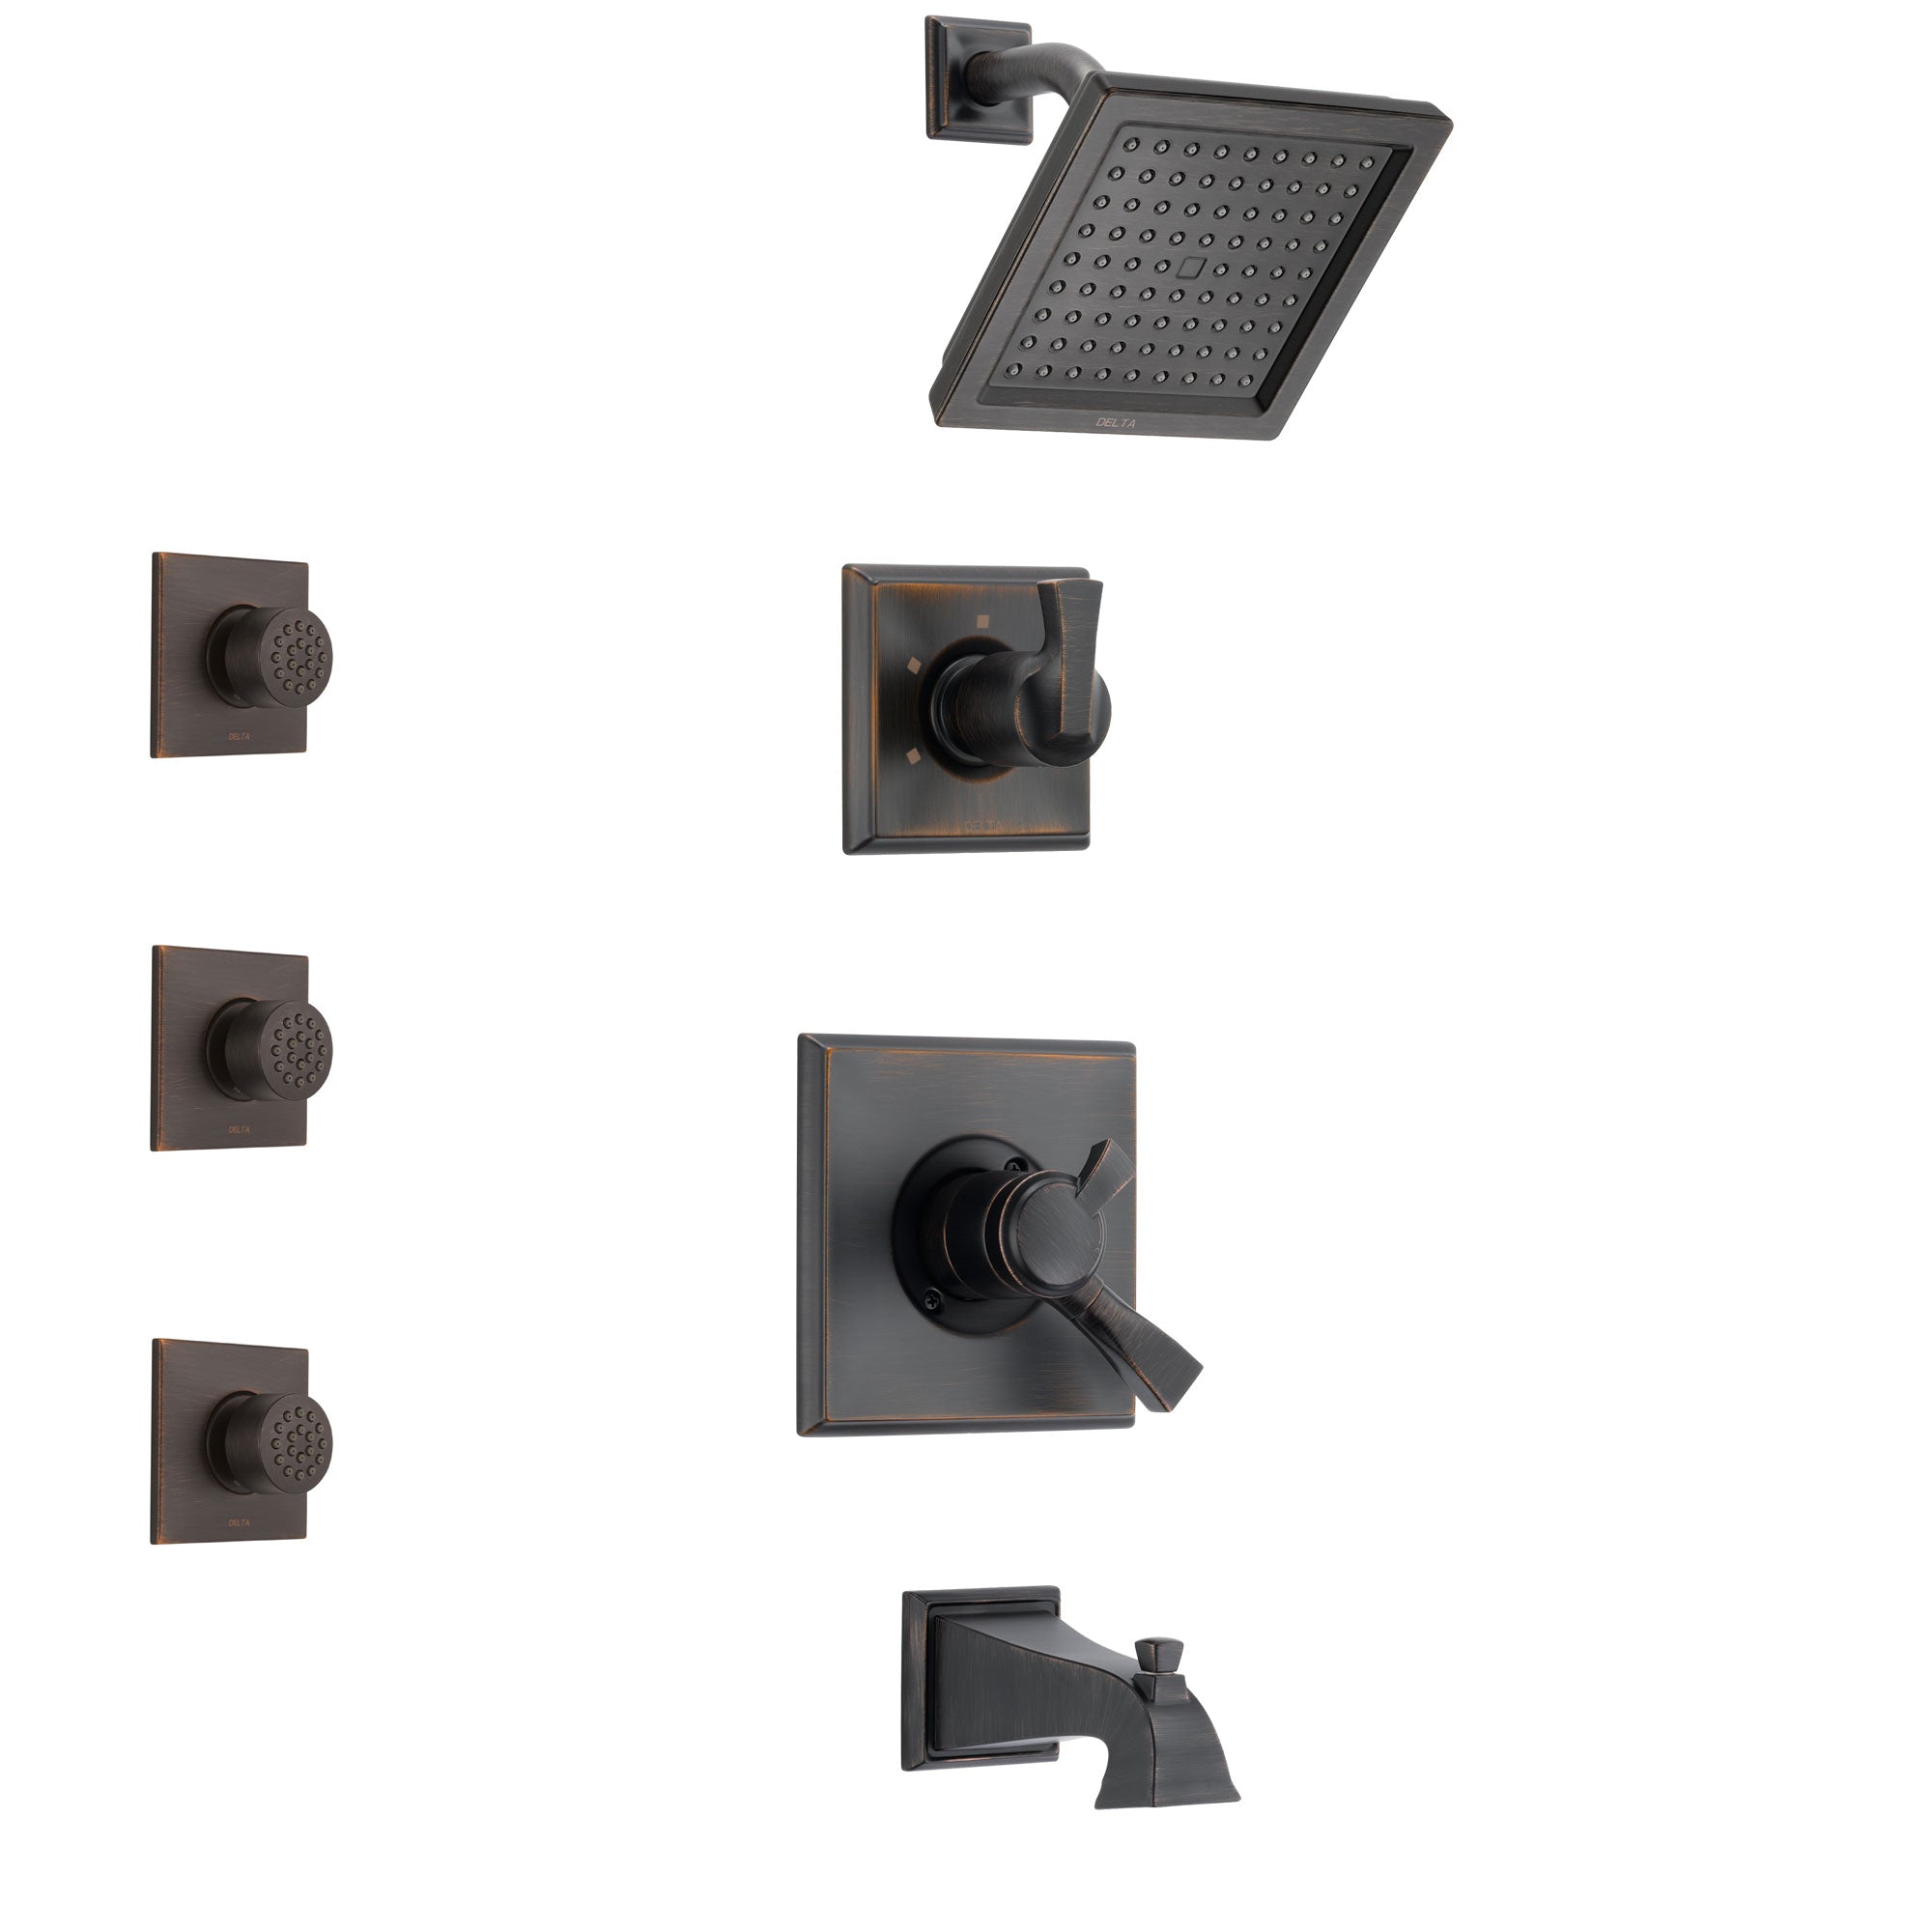 Delta Dryden Venetian Bronze Finish Tub and Shower System with Dual Control Handle, 3-Setting Diverter, Showerhead, and 3 Body Sprays SS174511RB2